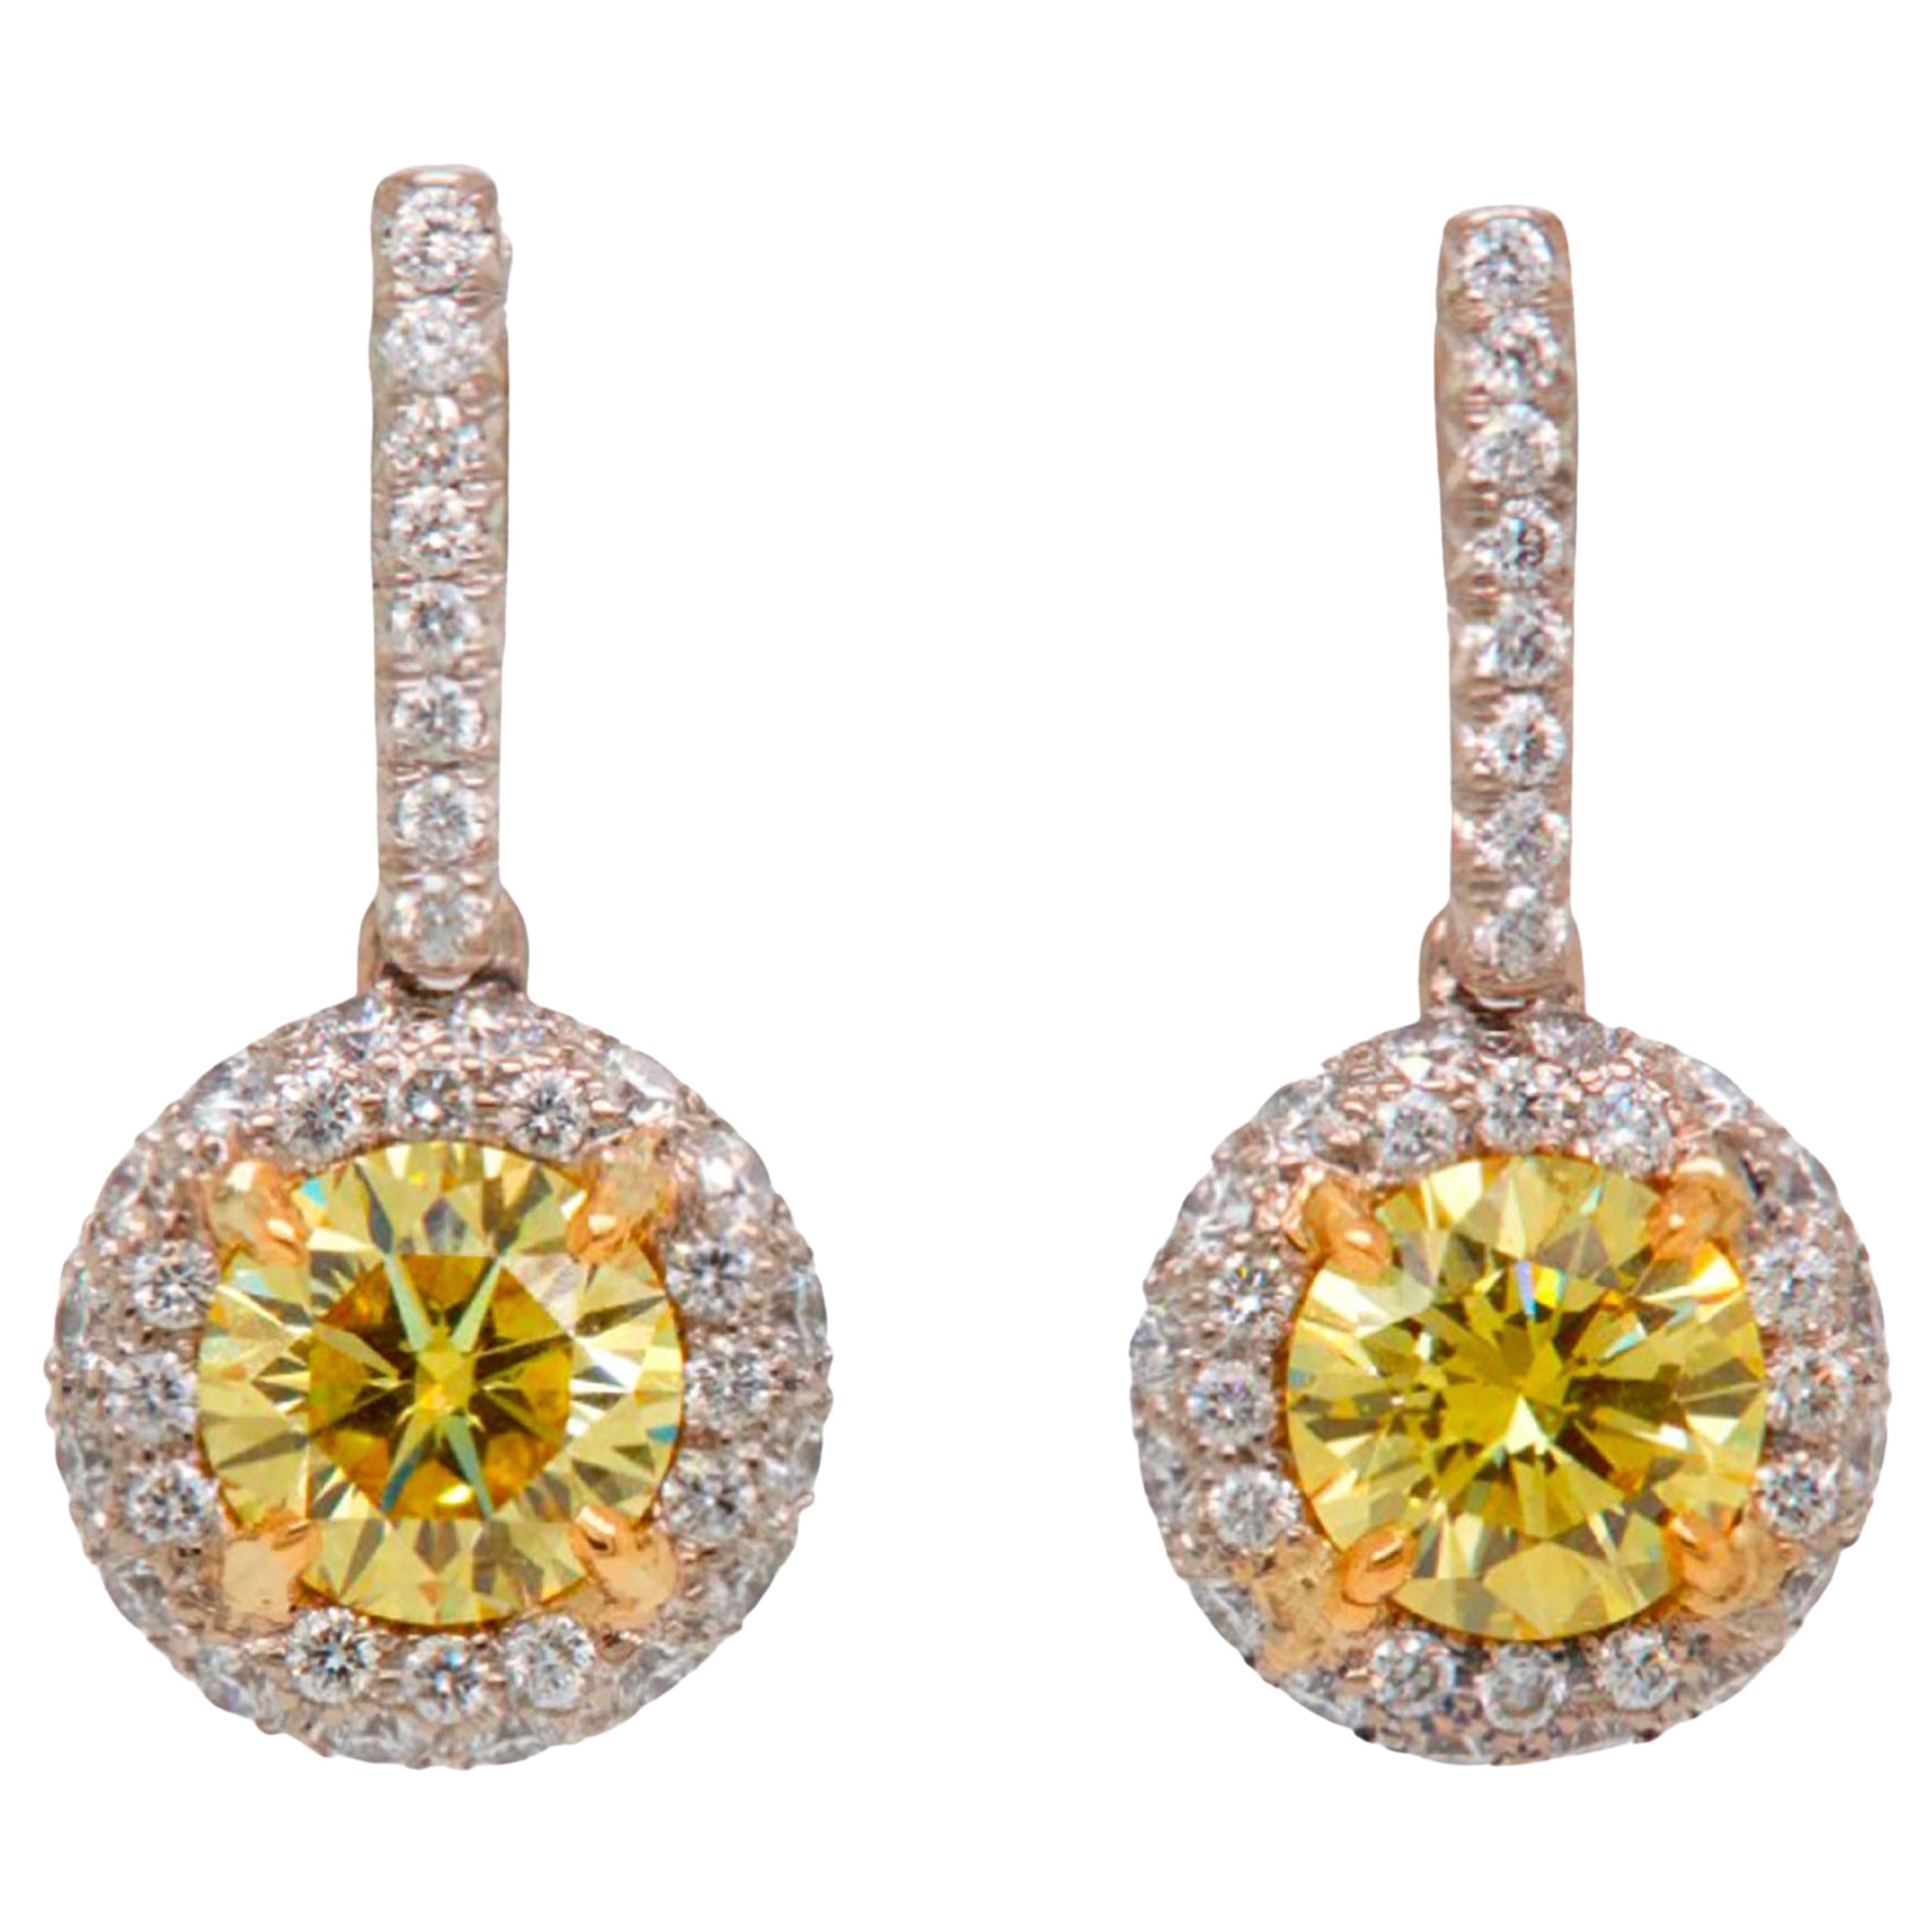 2.09 Carat Fancy Vivid Yellow Diamond Drop Earrings with Halo, GIA Report For Sale